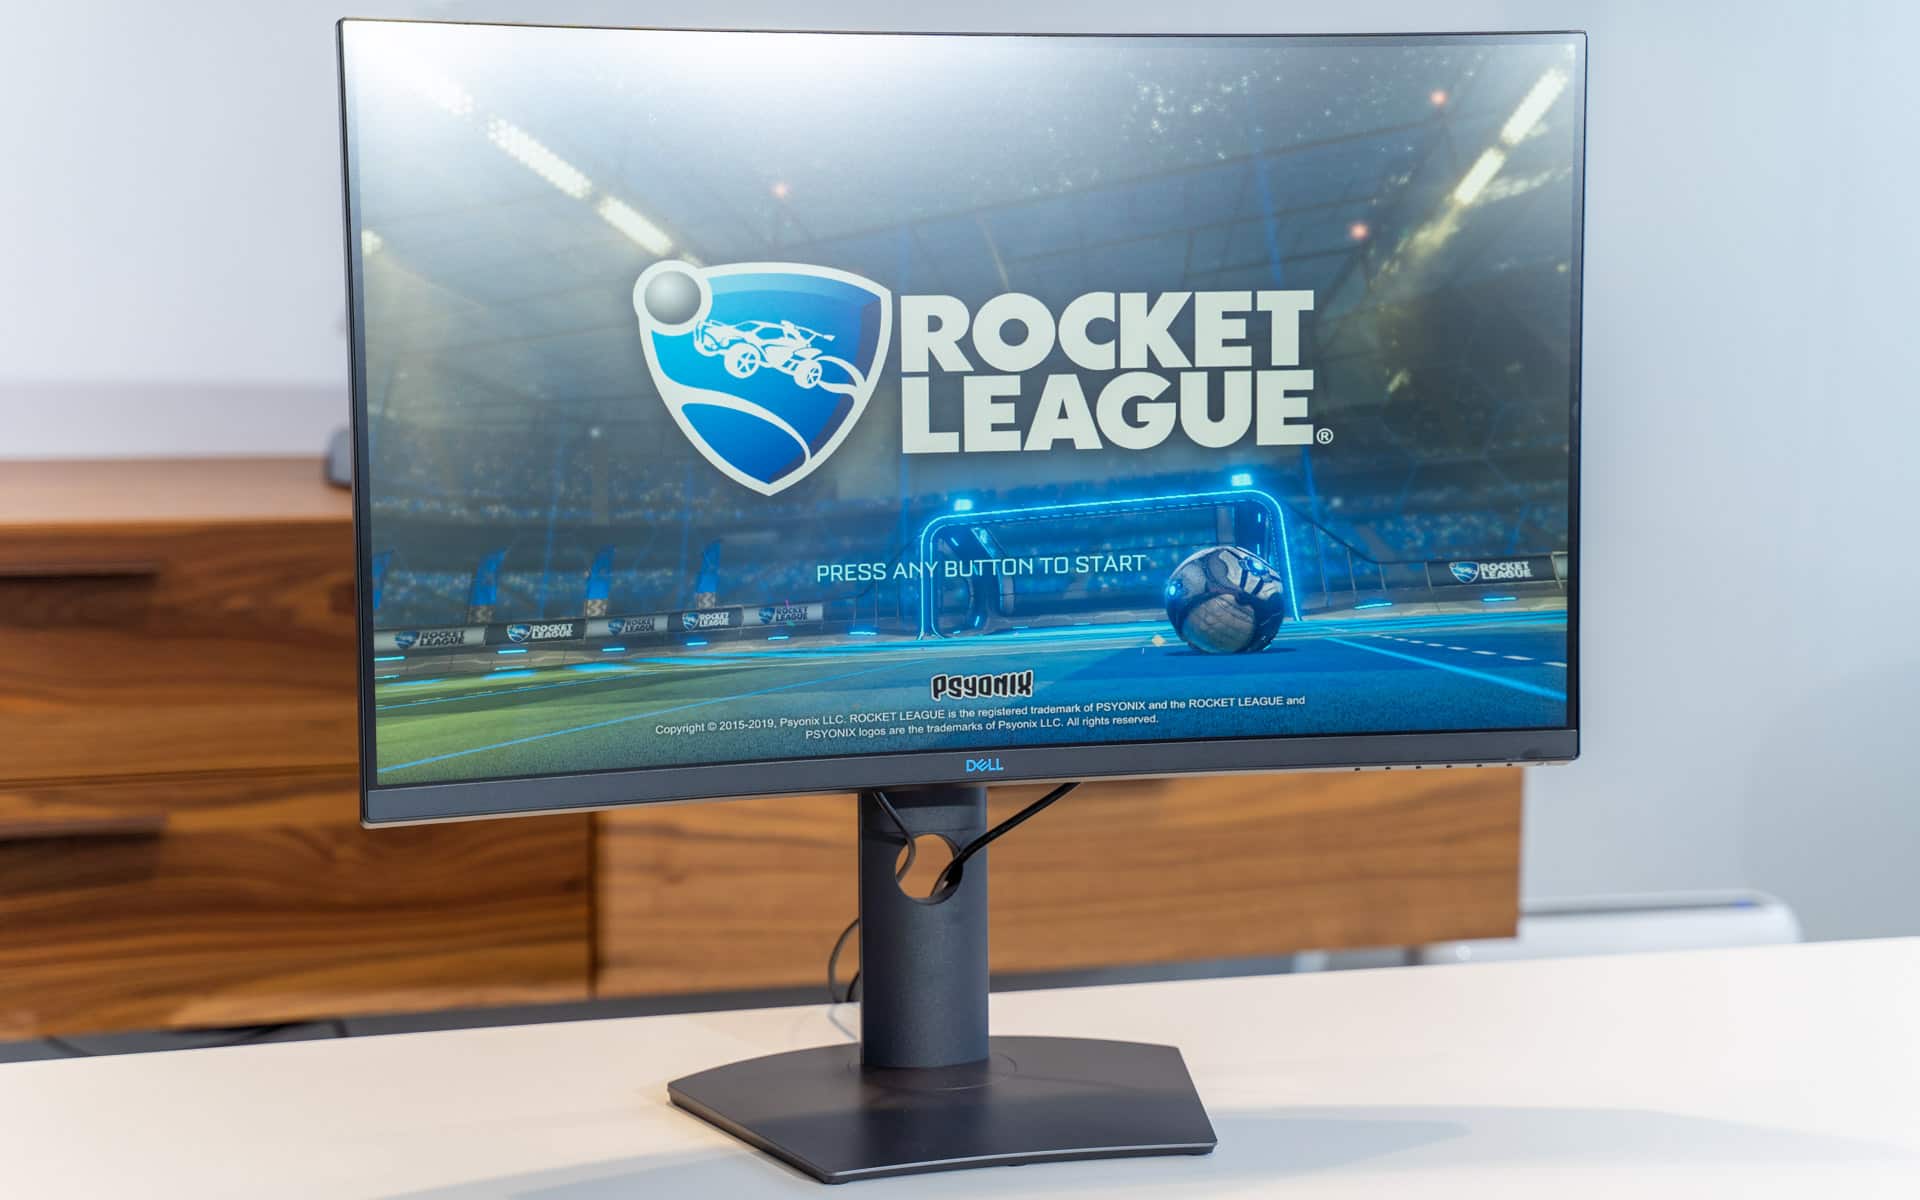 Dell 32 Curved Gaming Monitor Review – Immersion Like no Other